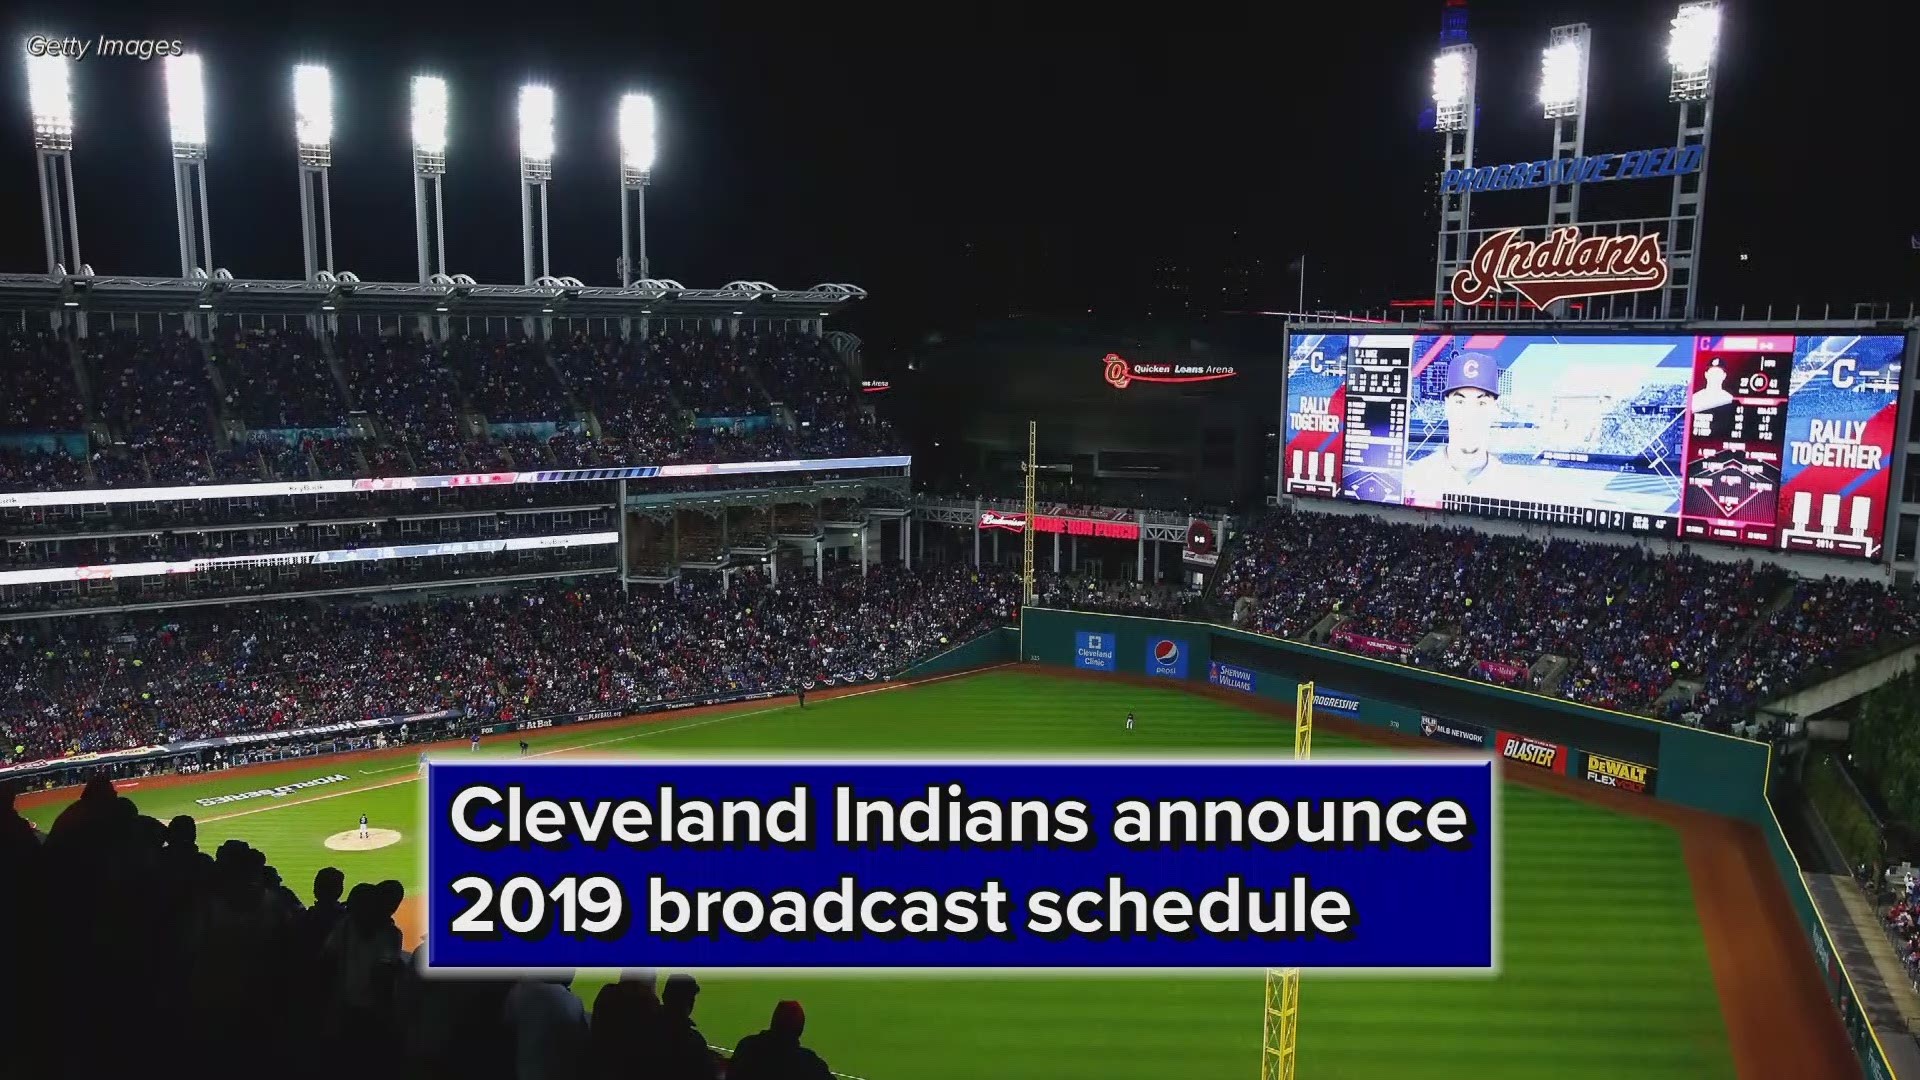 Cleveland Indians announce 2019 broadcast schedule; 4 games to air on